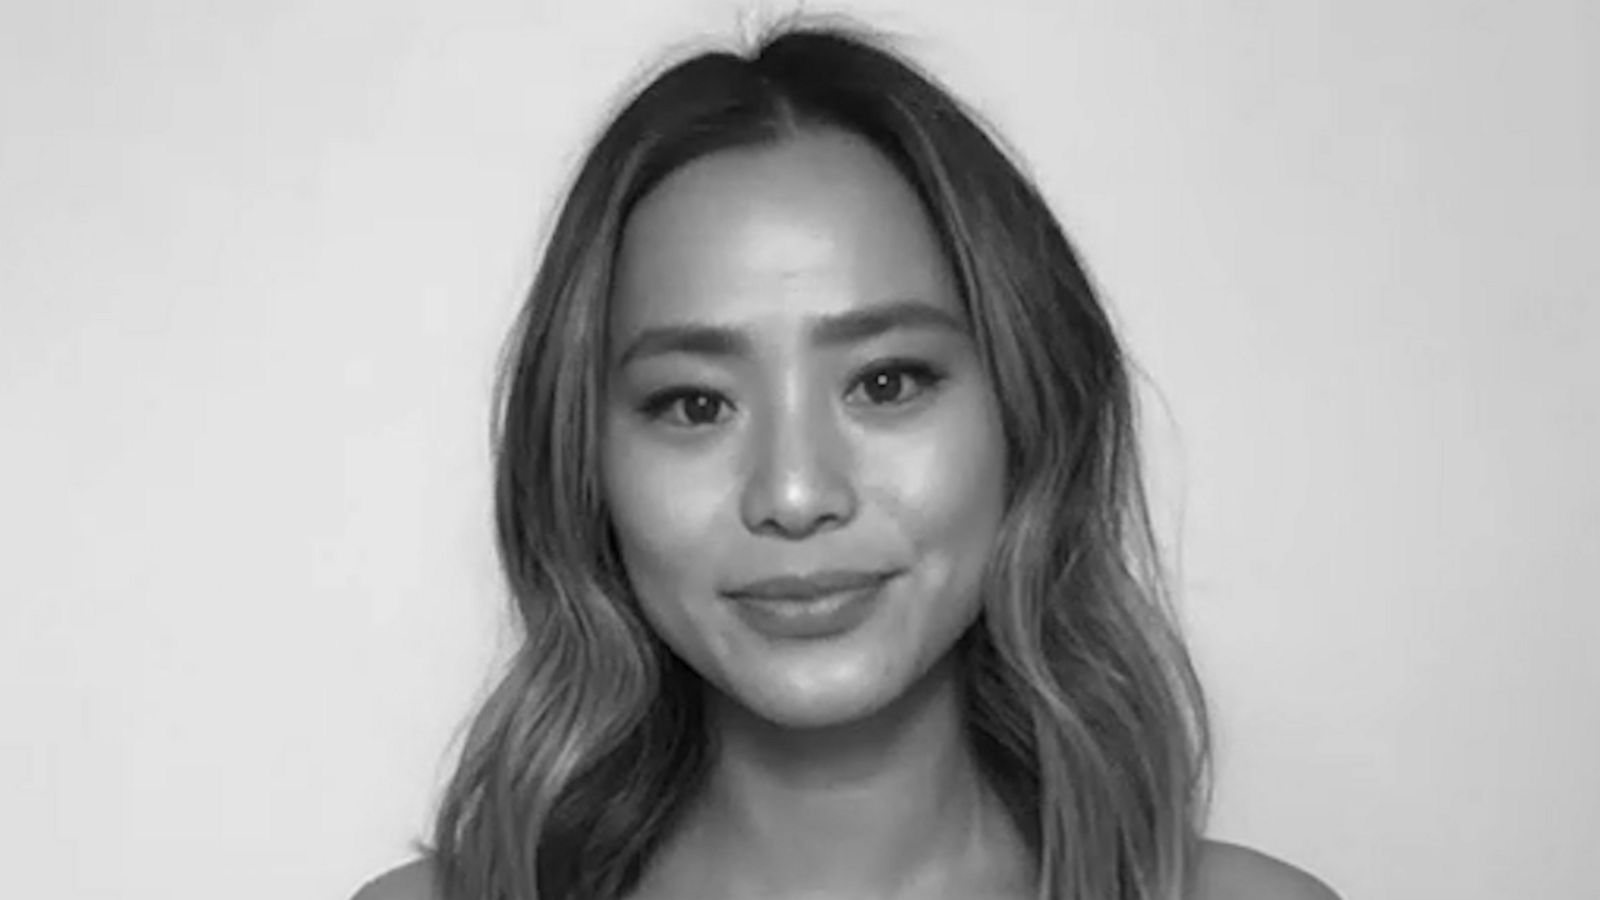 VIDEO: Actress Jamie Chung pays tribute to Asian American heroes who ‘fought for visibility’